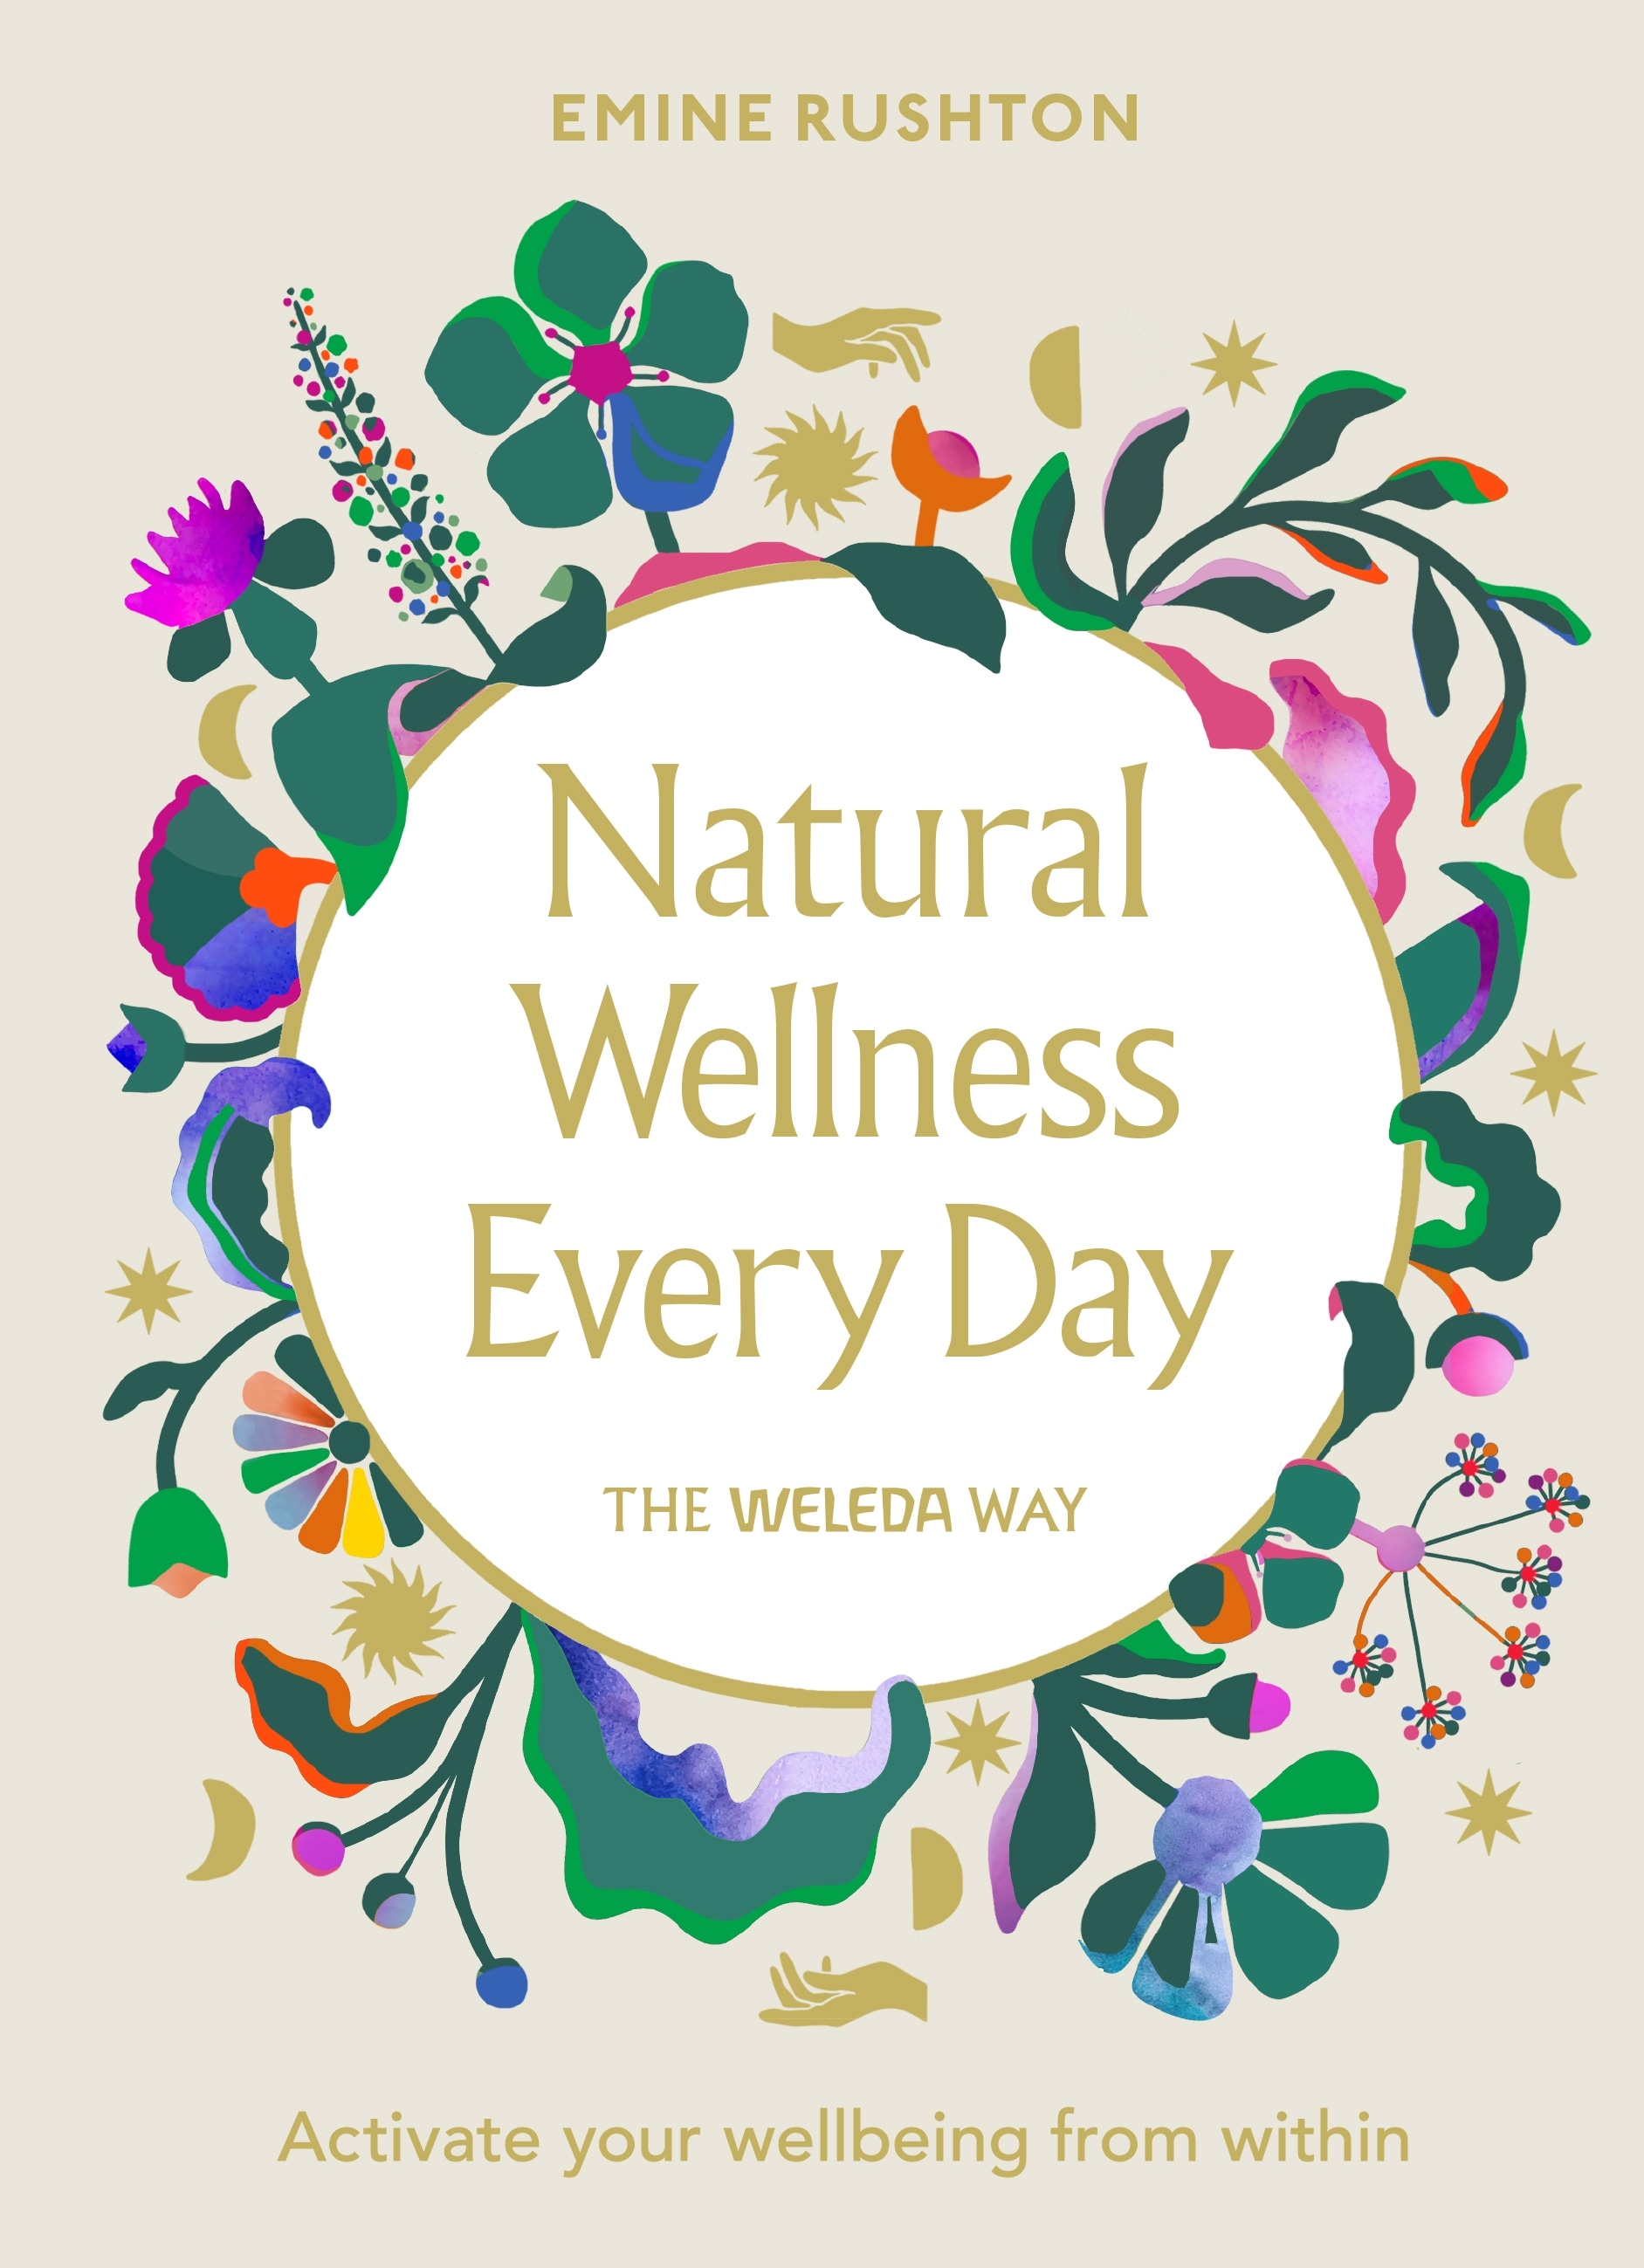 Book “Natural Wellness Every Day” by Emine Rushton — January 13, 2022